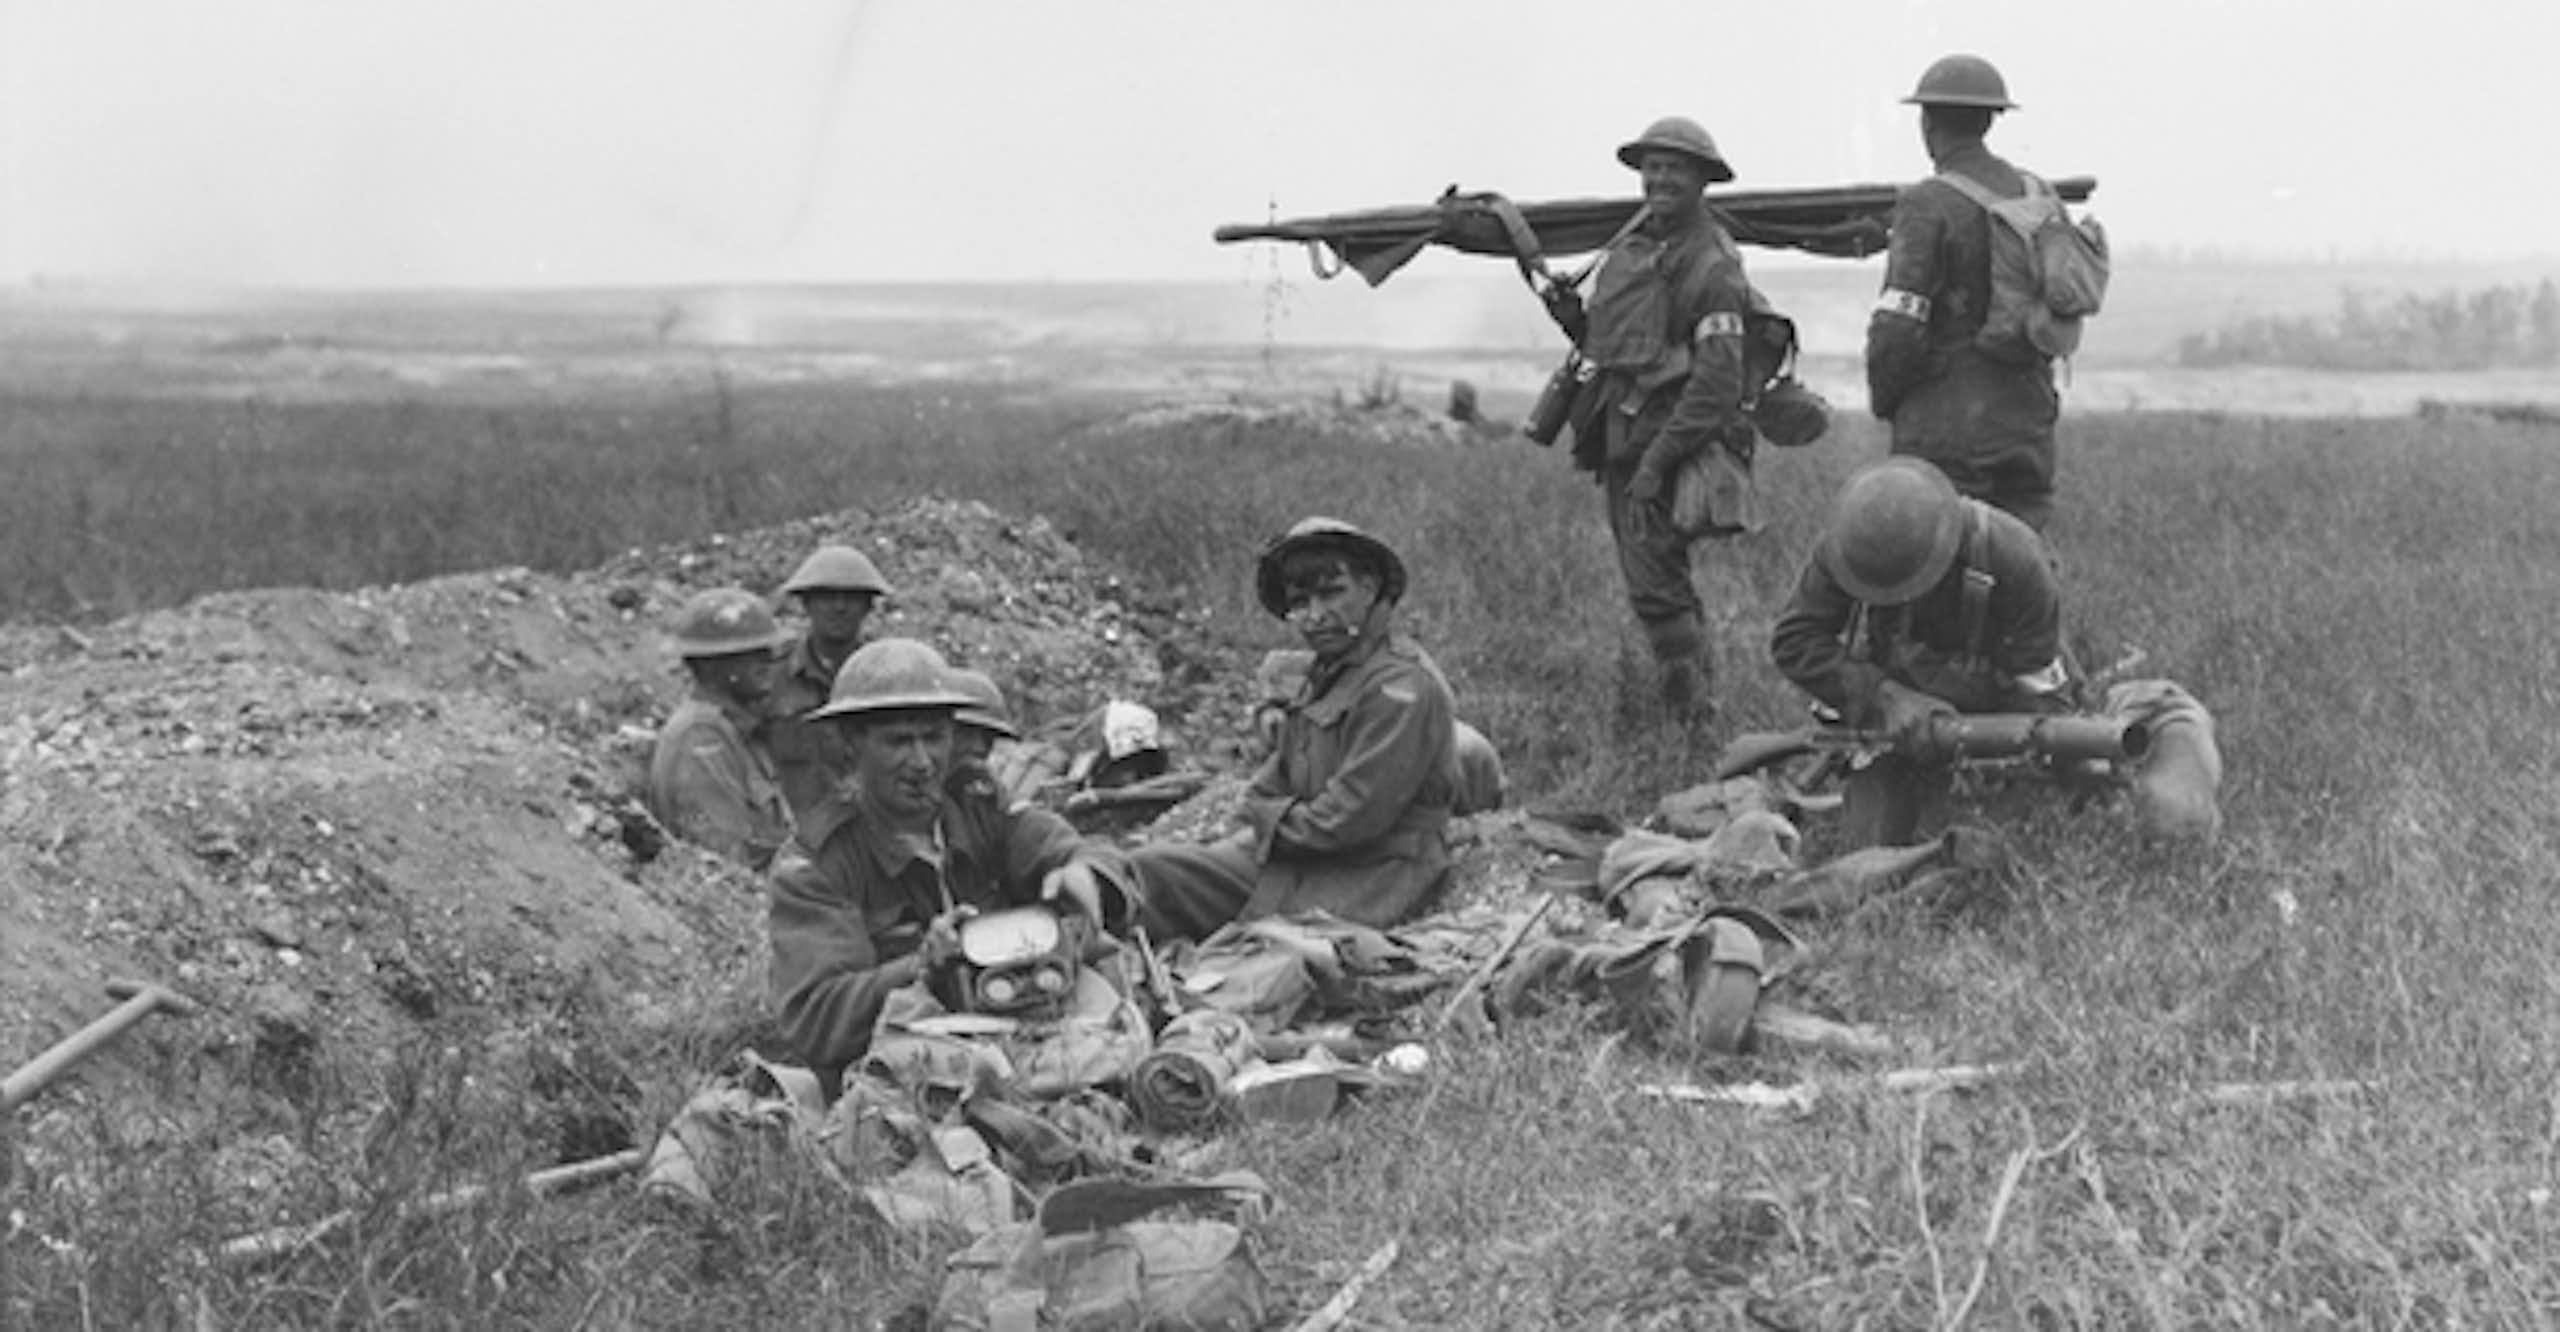 ‘It bucked our lads up wonderfully’: the lightning-quick WWI battle that marked the birth of the US-Australia military alliance